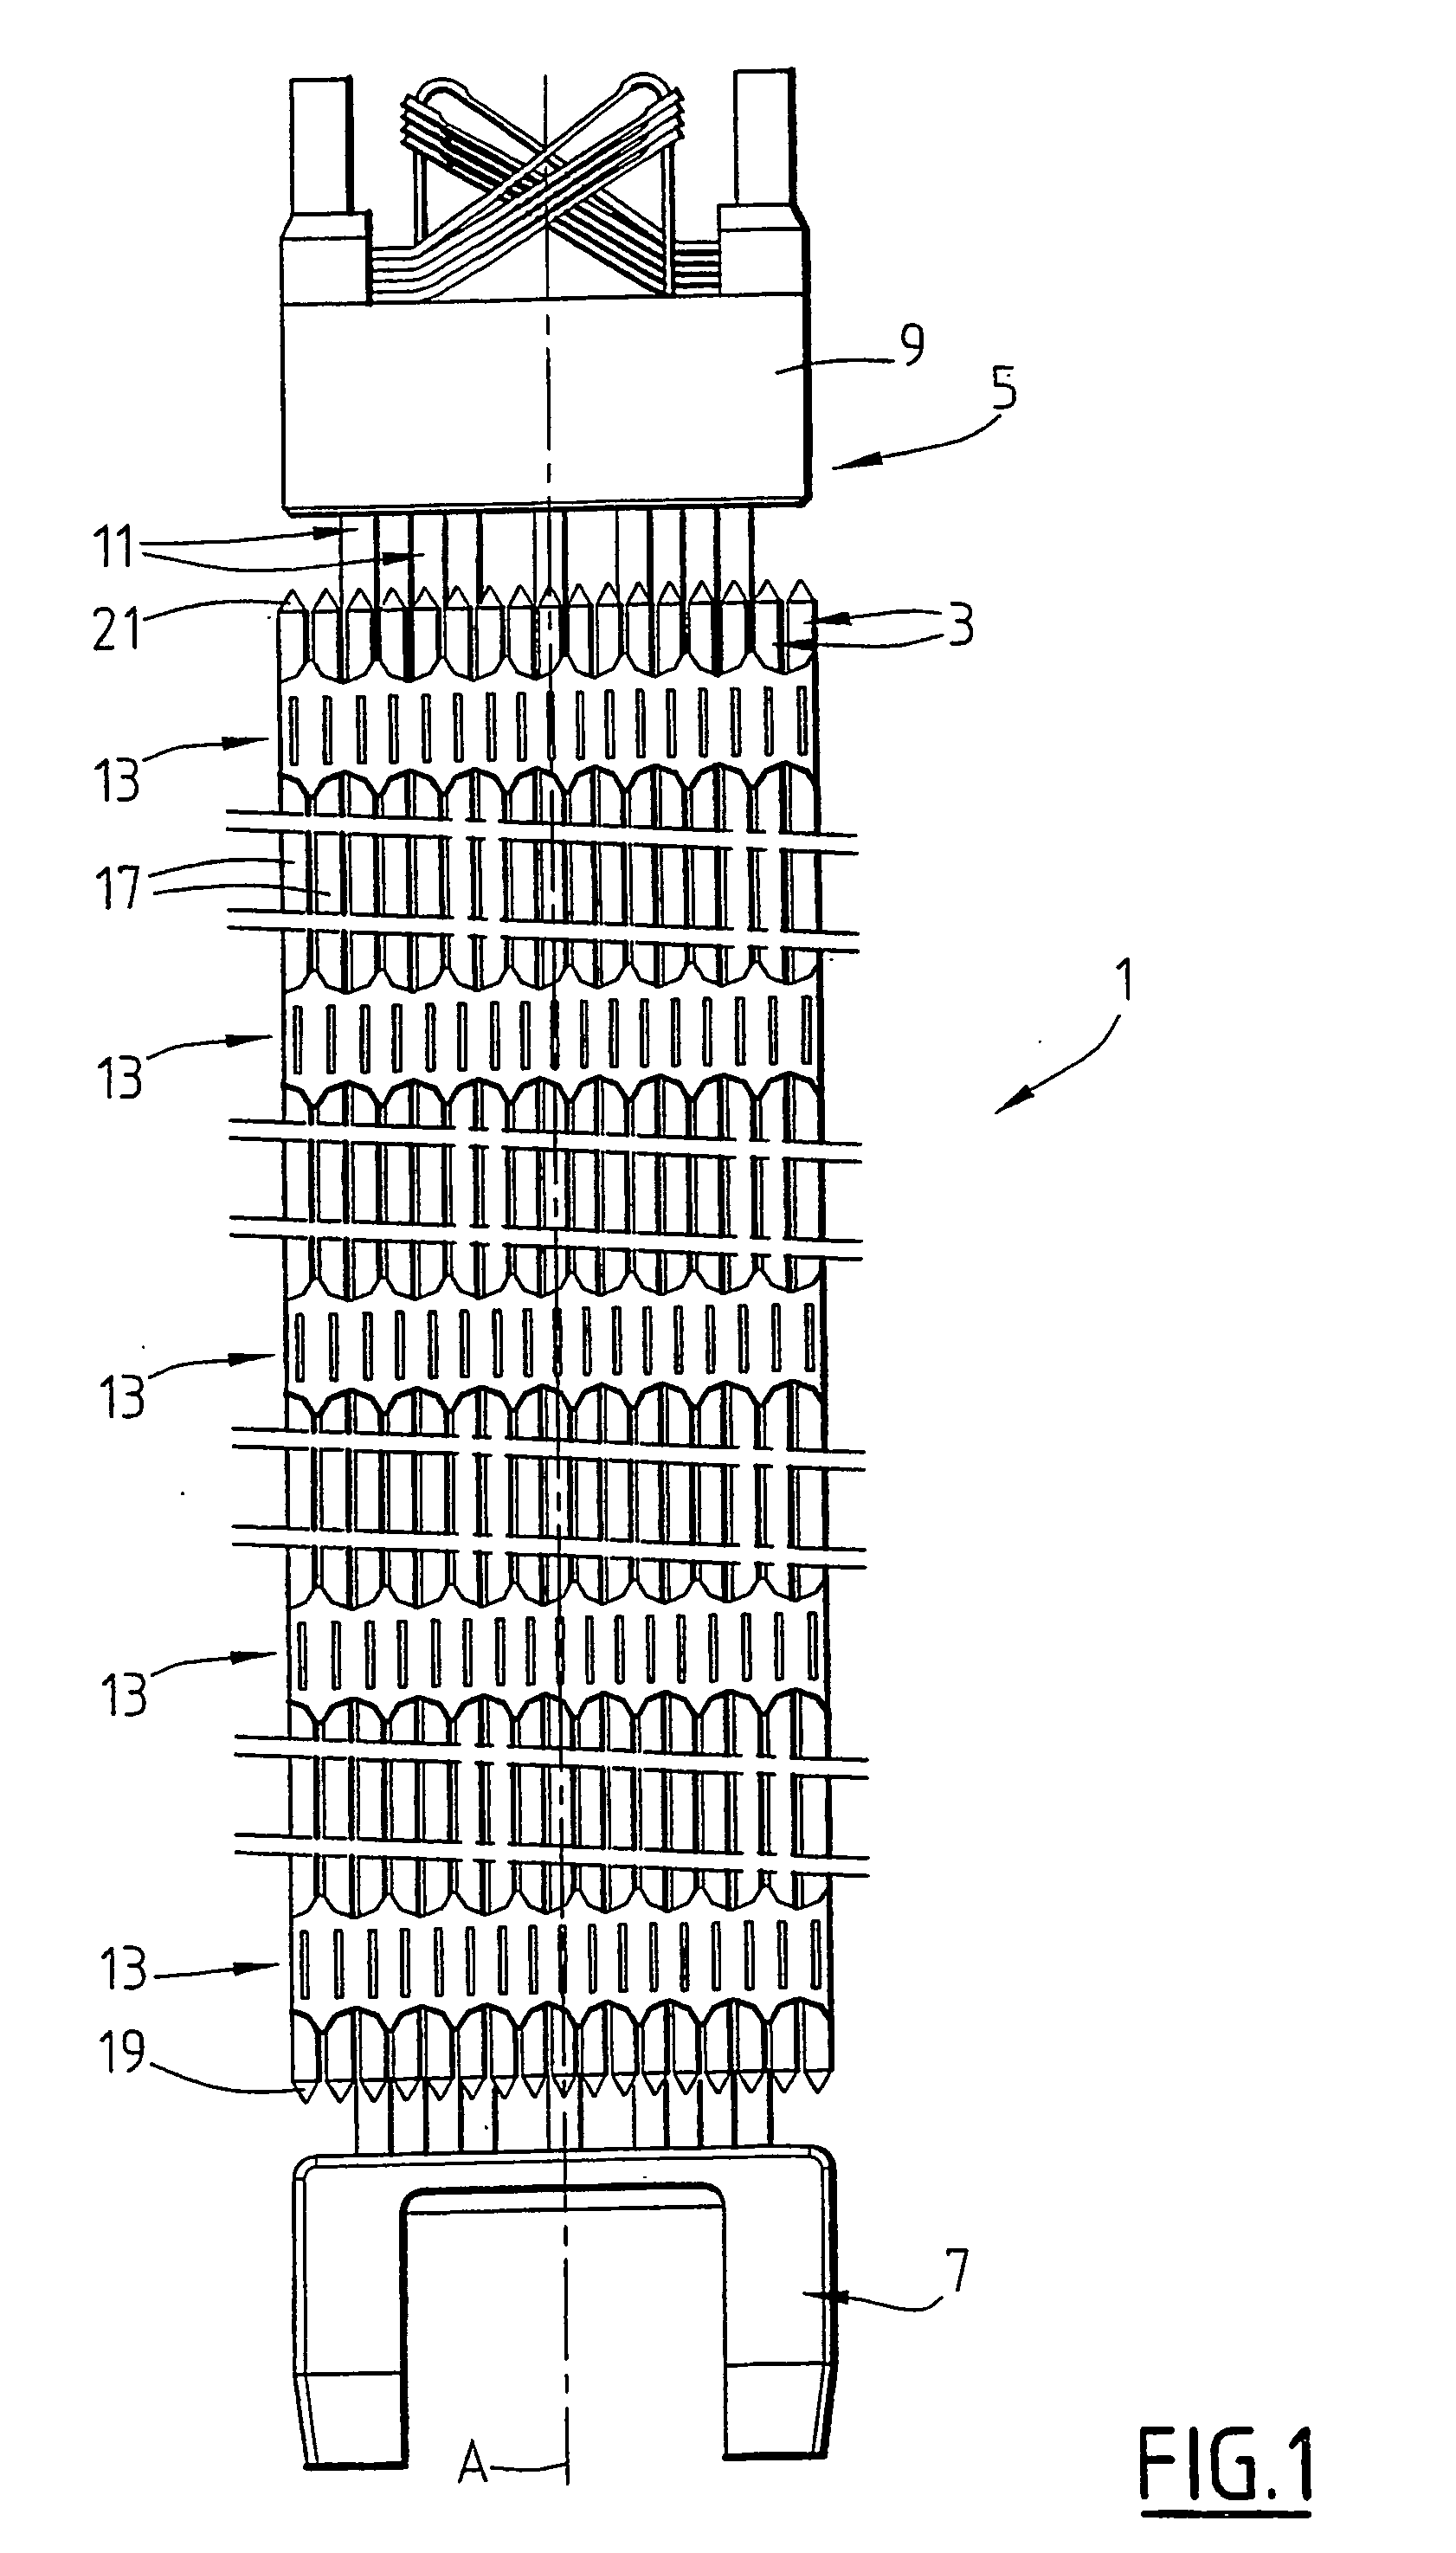 Terminal end-piece for a fuel assembly having a nose for orienting the flow of coolant fluid and corresponding assembly